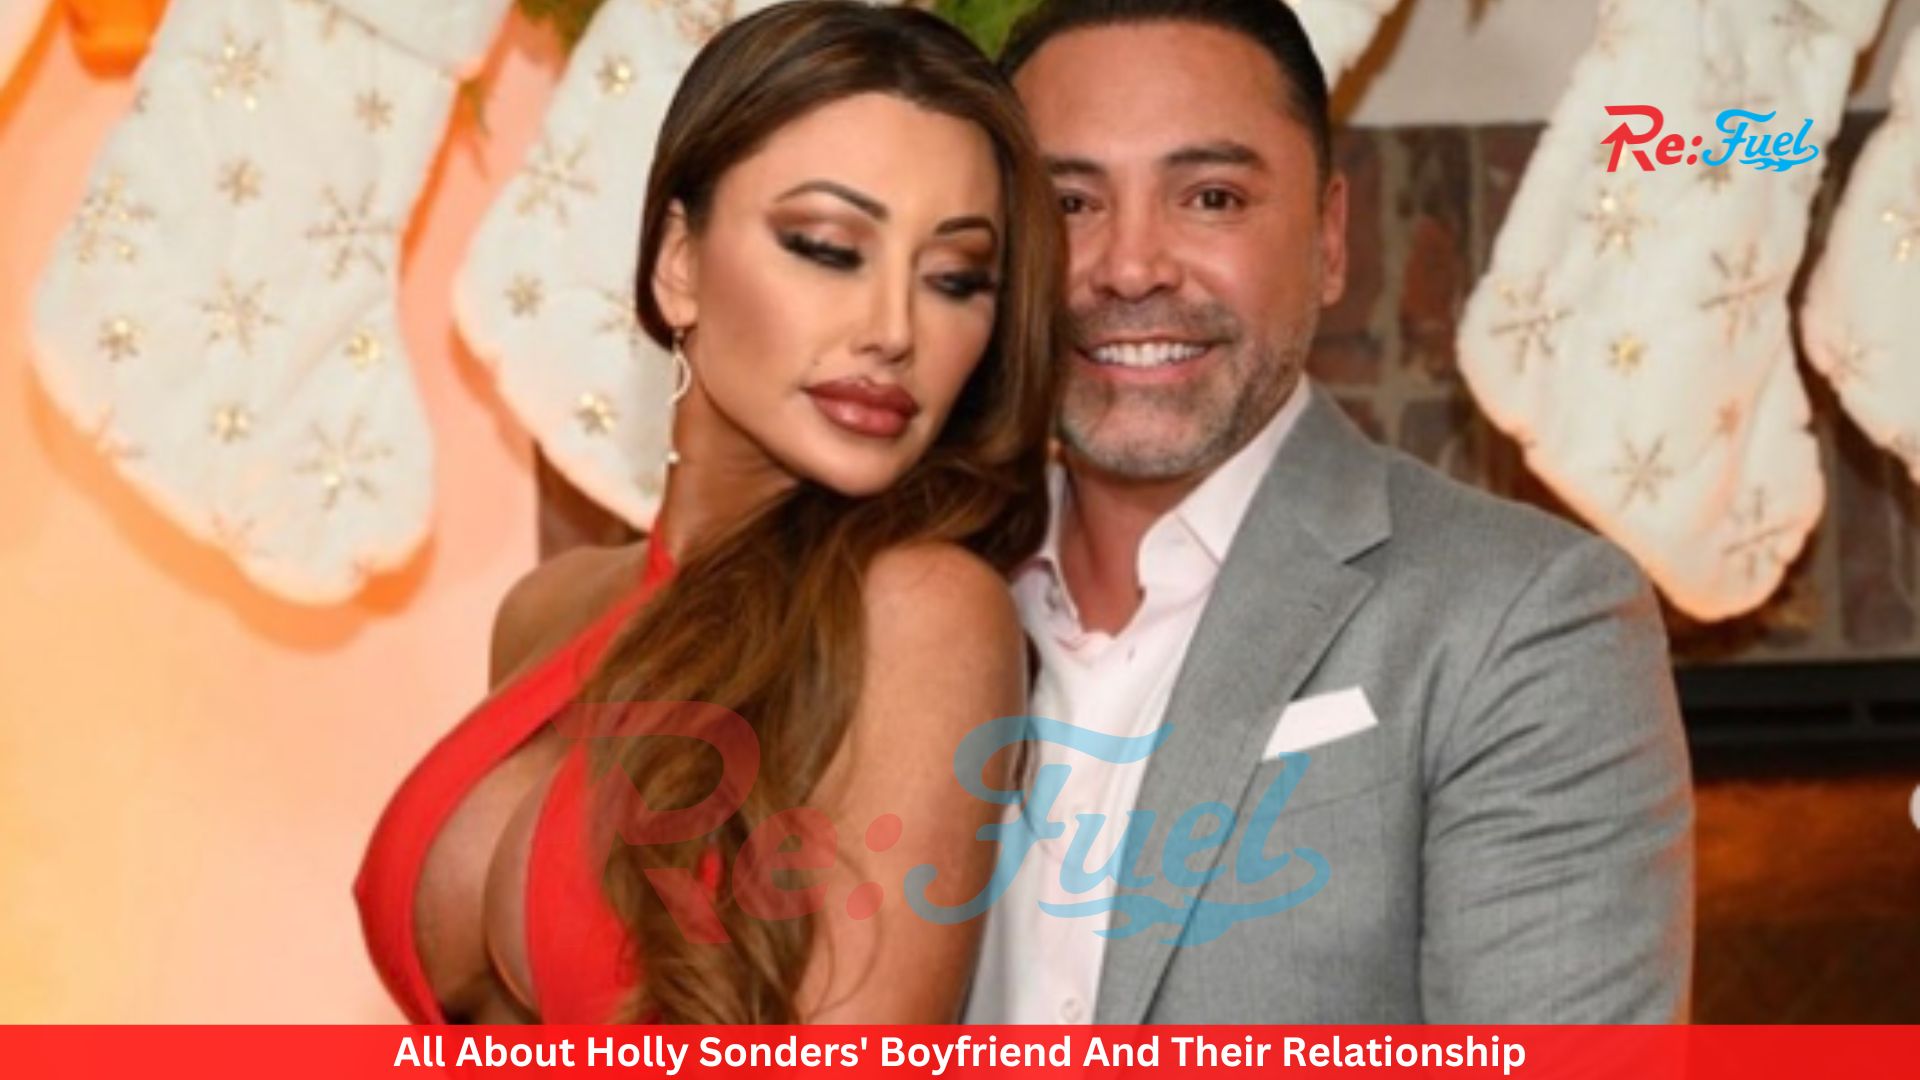 All About Holly Sonders' Boyfriend And Their Relationship